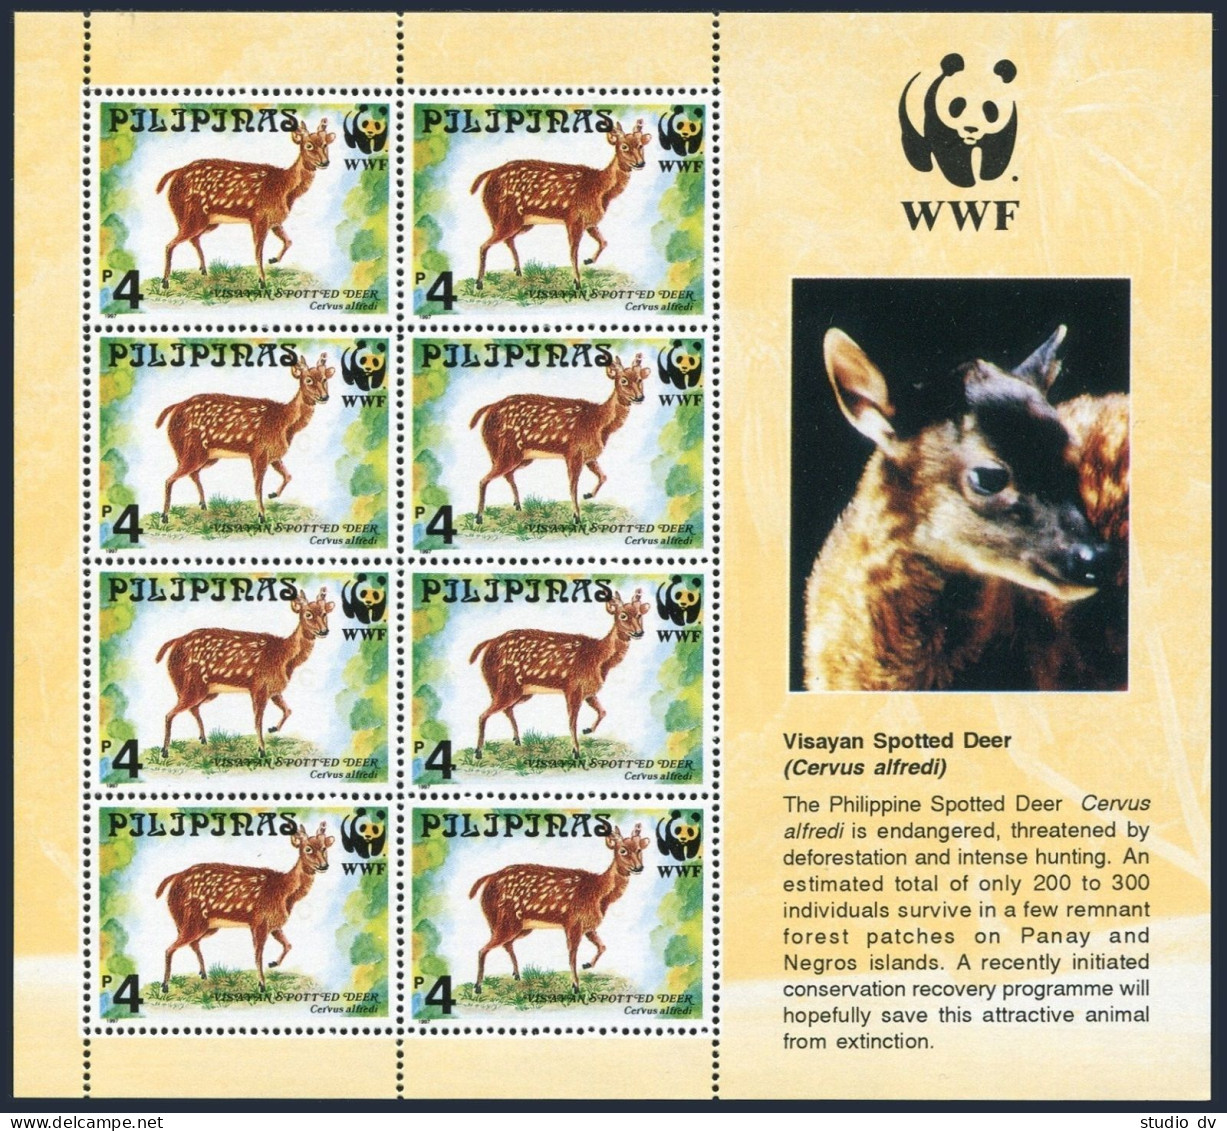 Philippines 2476a Sheet, MNH. WWF 1997. Visayan Spotted Deer. - Philippines